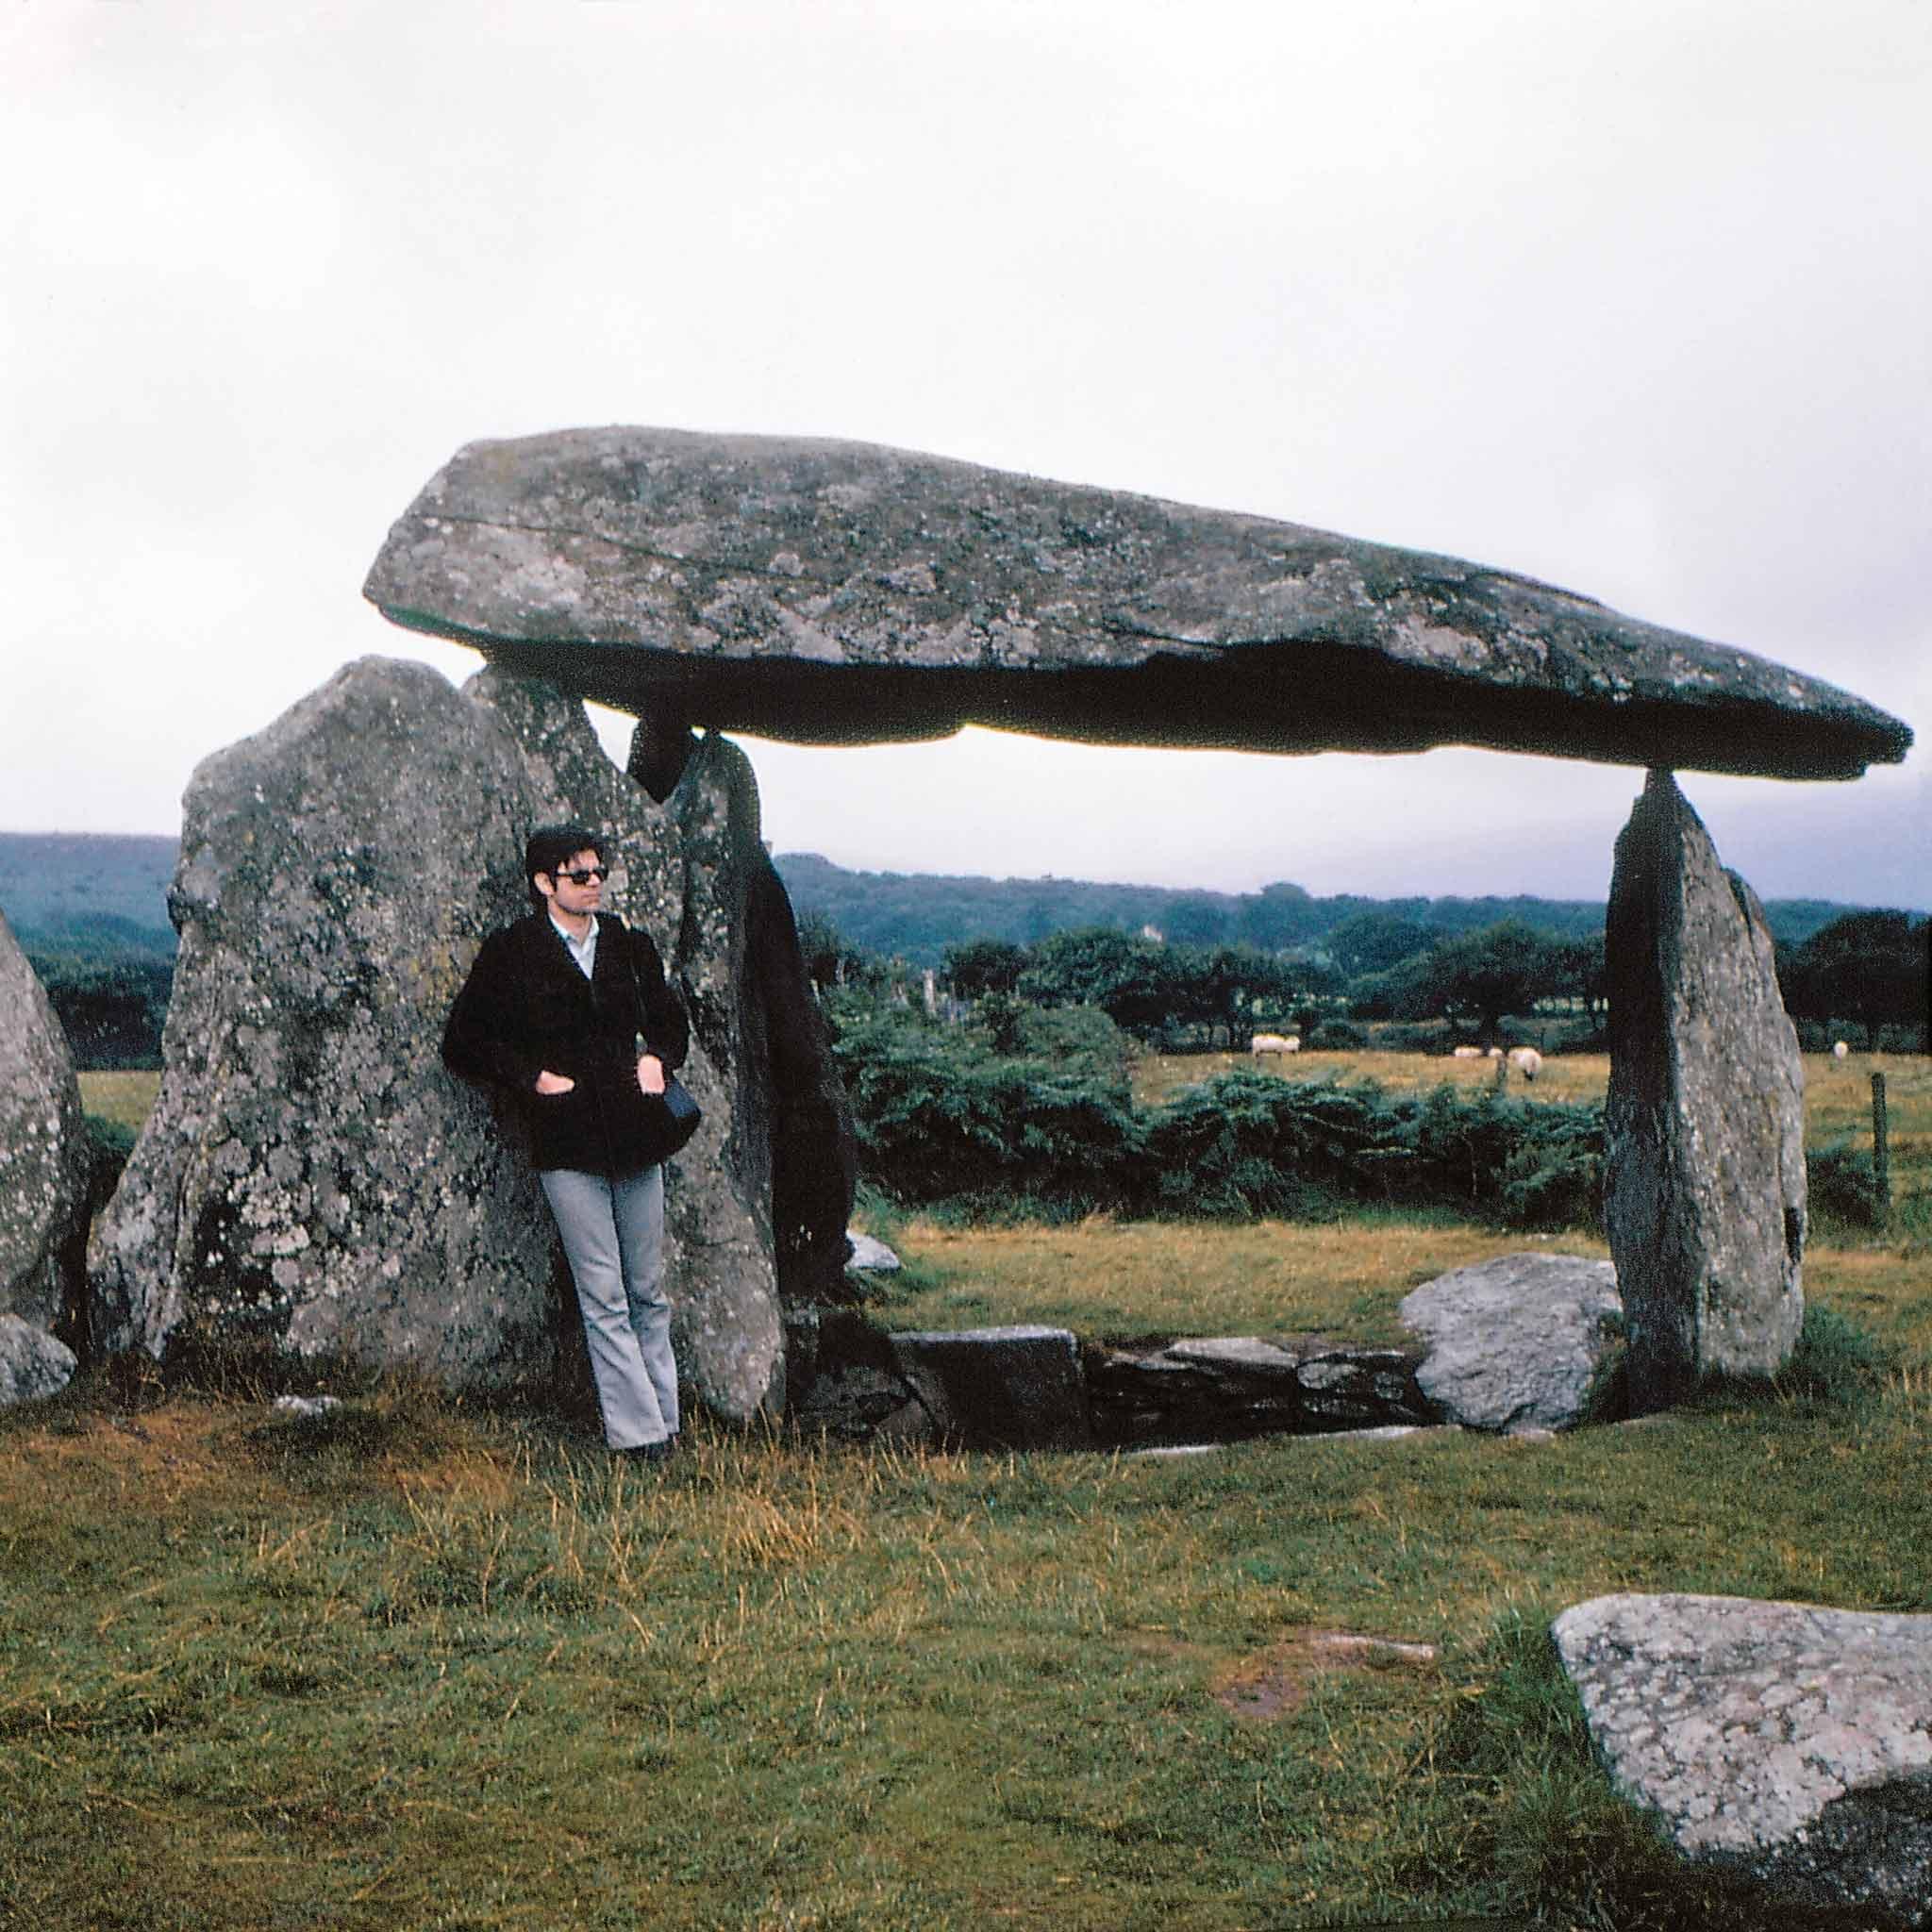 Robert Smithson posing with a dolmen at Pembrokeshire National Park in Wales. Photograph by Nancy Holt.